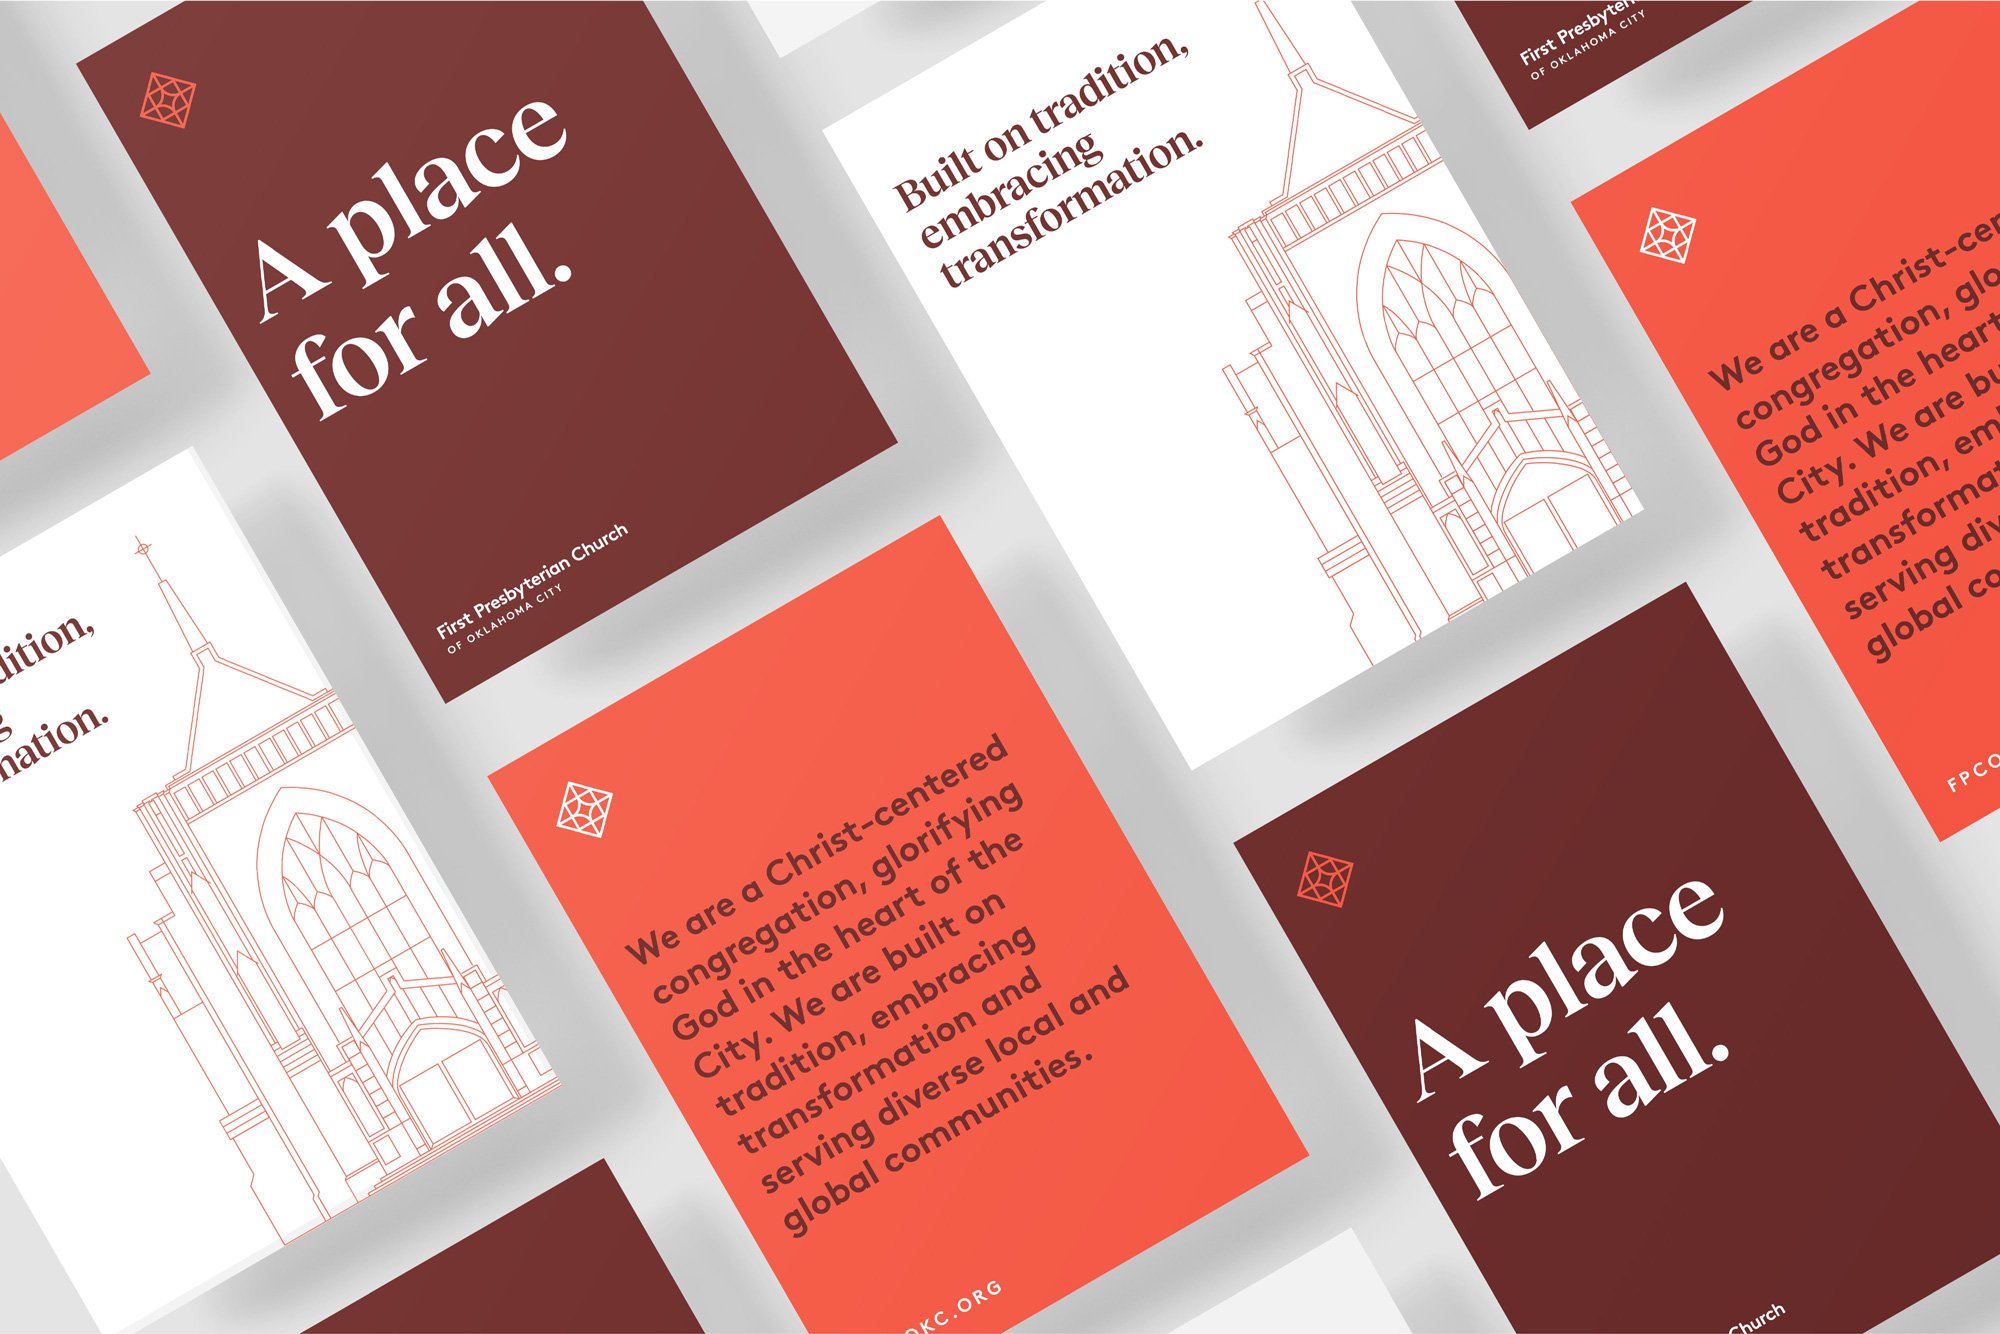 New Logo and Identity for First Presbyterian Church of Oklahoma City by J.D. Reeves